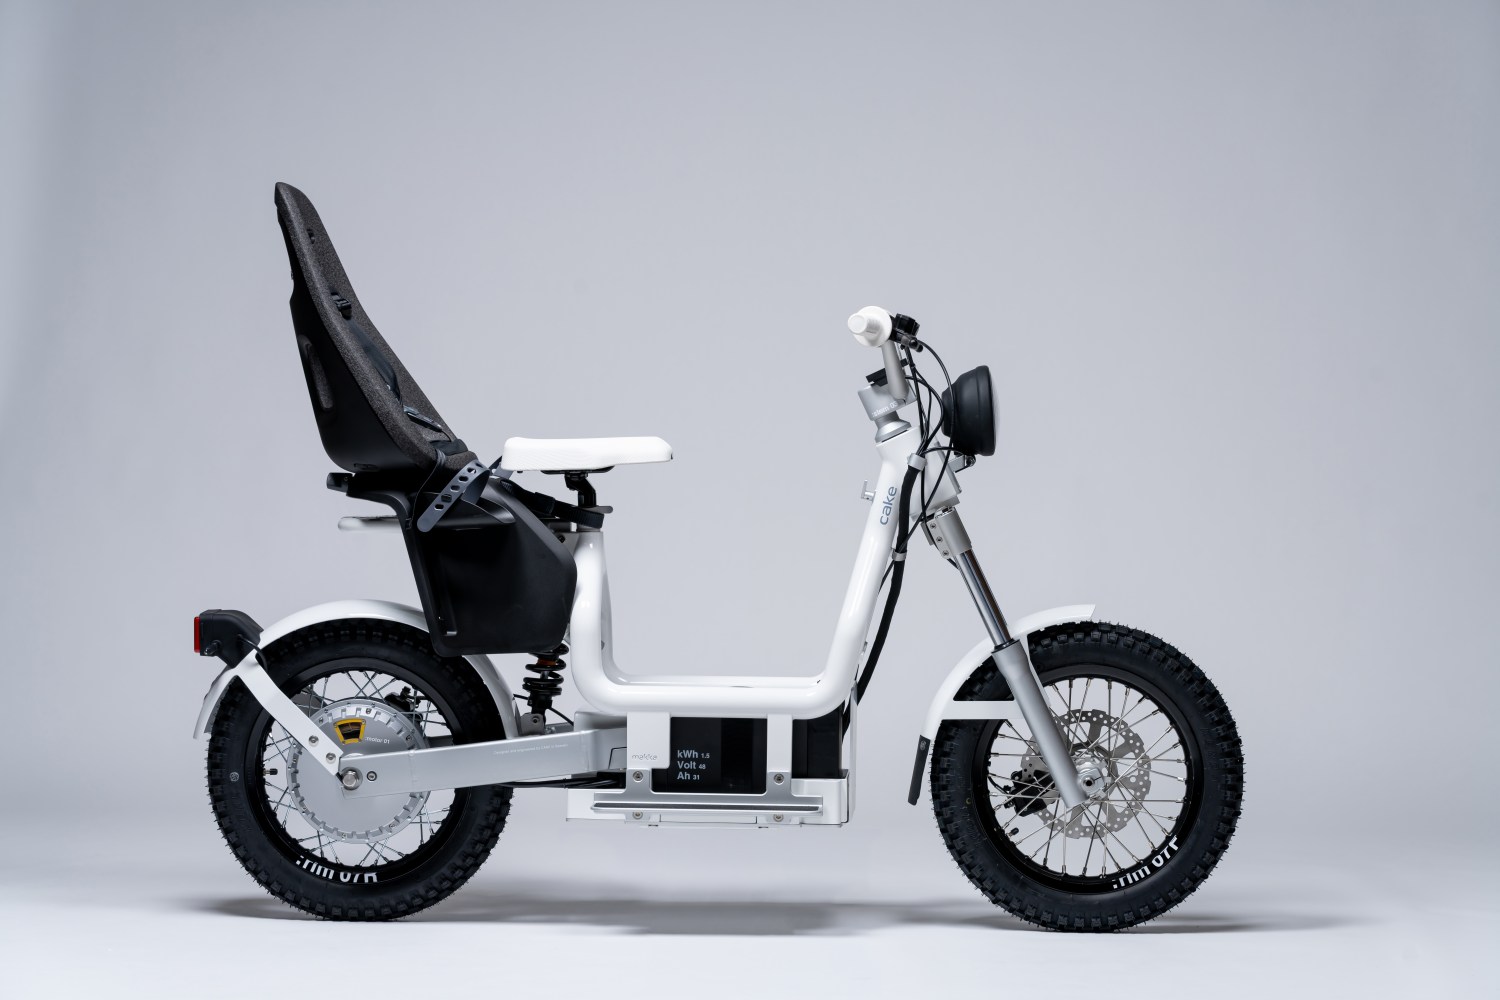 Cake launches the Makka, a $3,500 electric moped for city riding